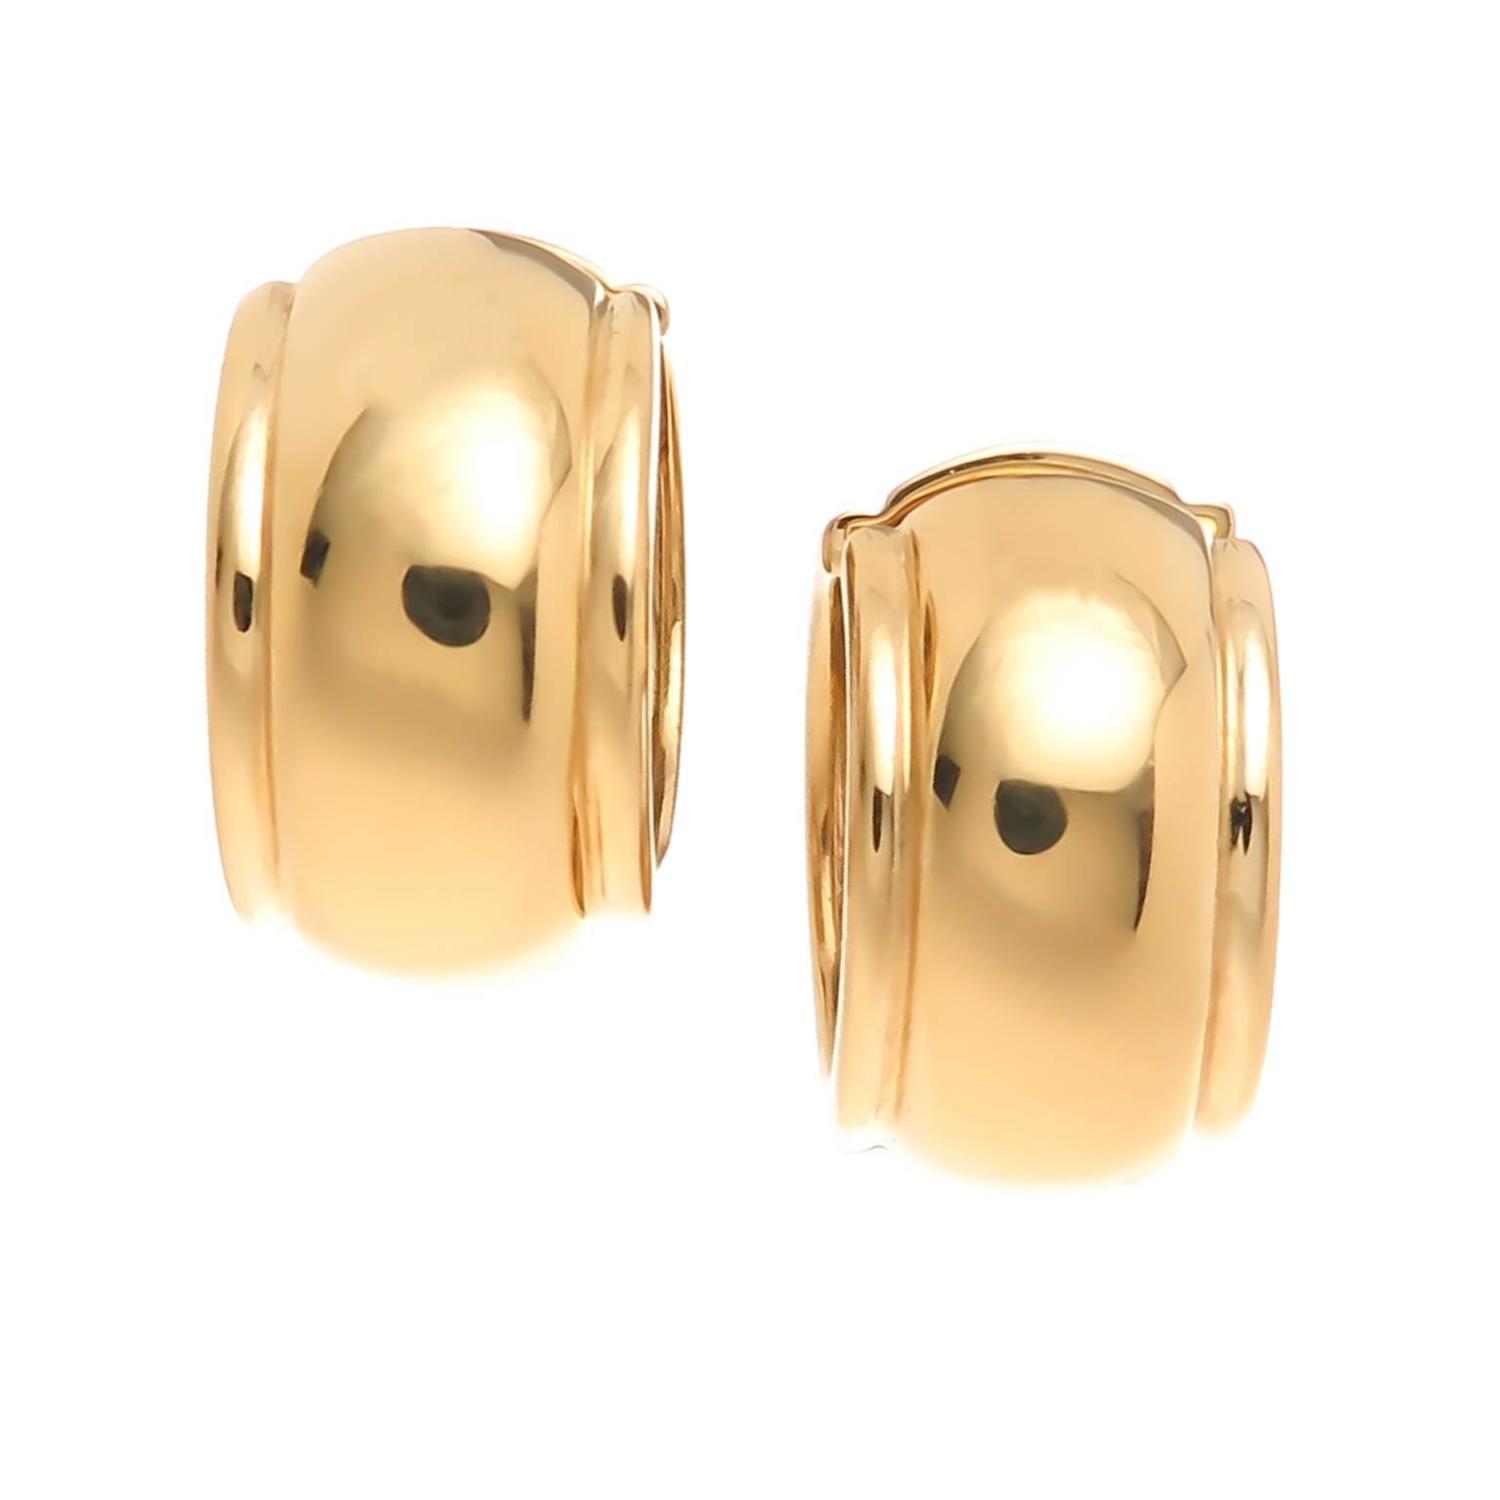 Tiffany and Company wide yellow Gold Hoop Earrings at 1stdibs